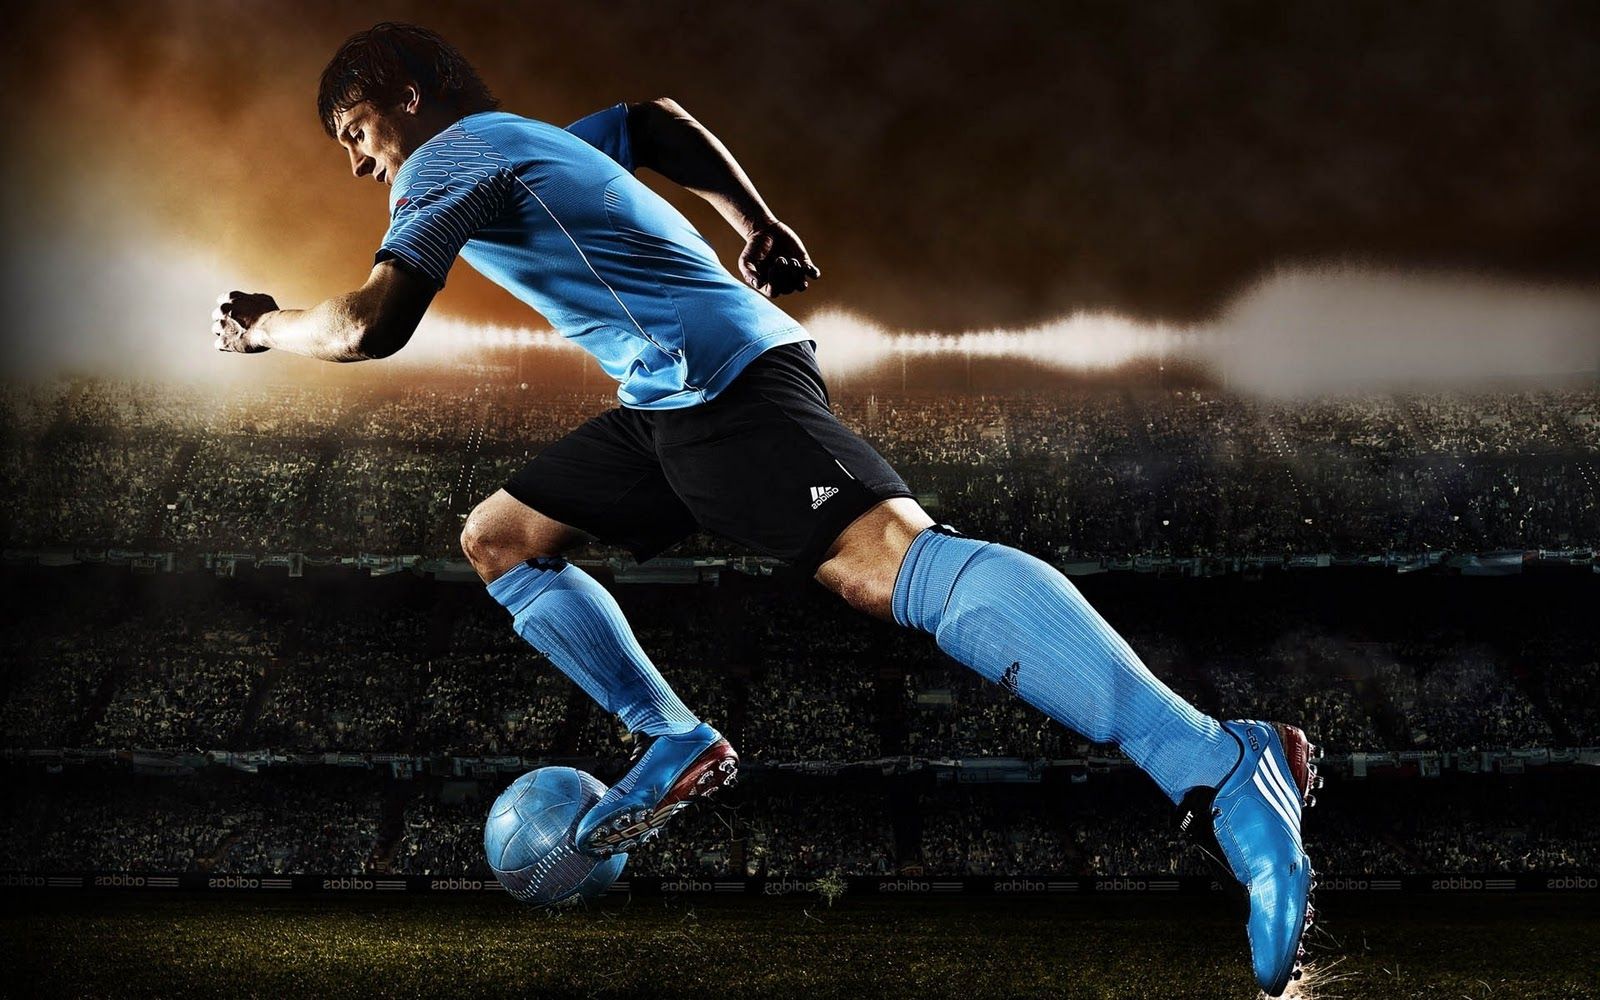 Sport Wallpaper Collections 5373 - Amazing Wallpaperz